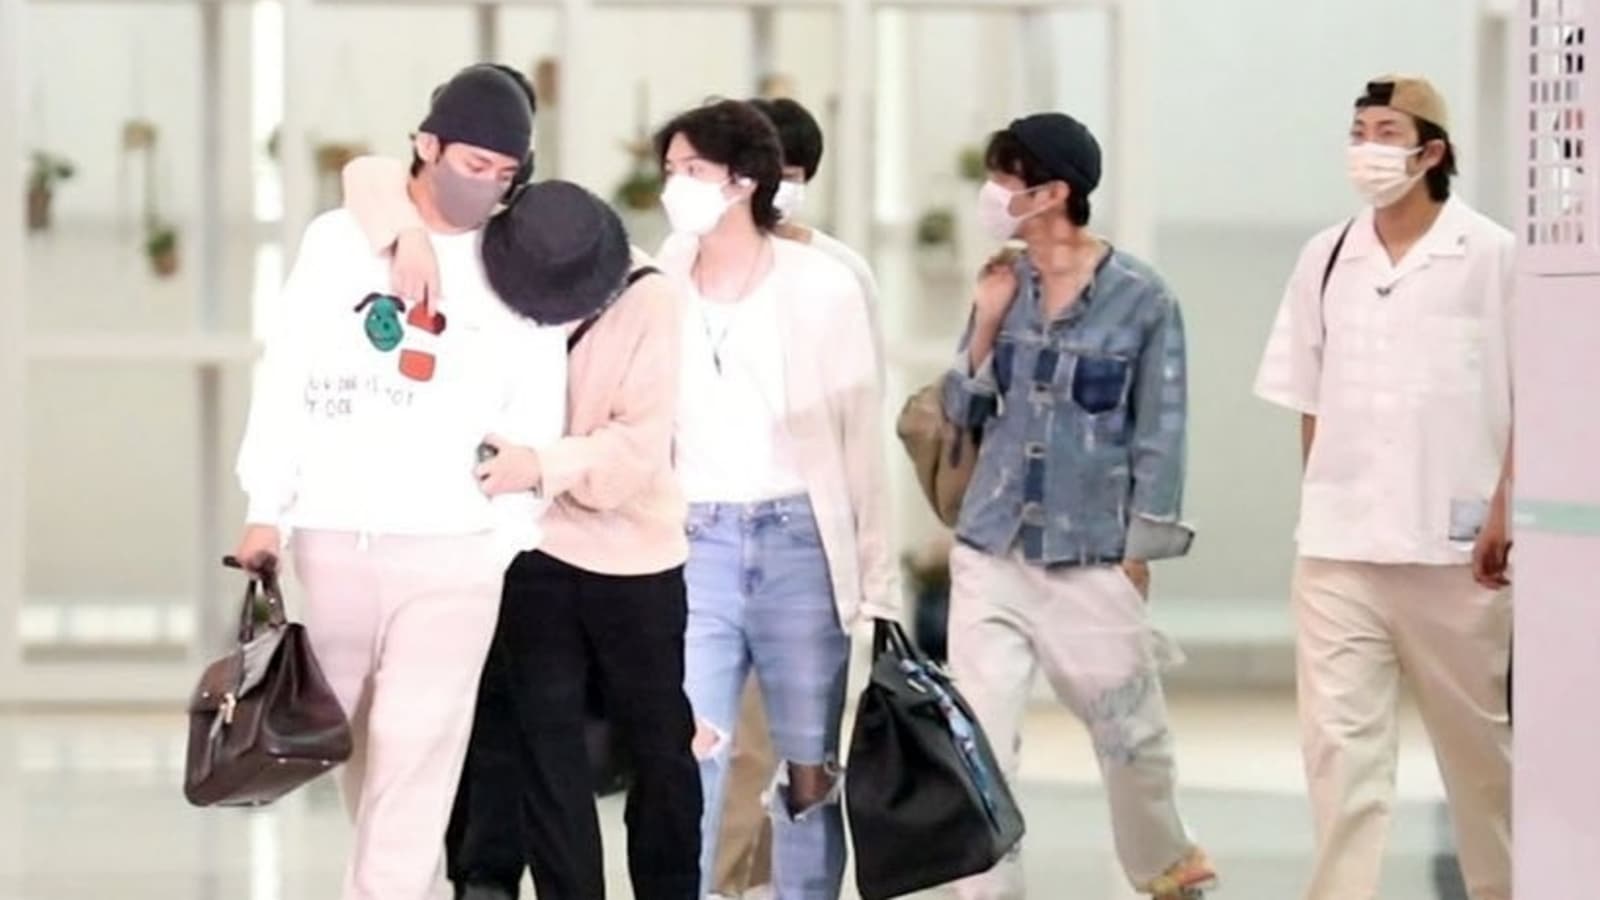 BTS's V Turns Heads At The Airport With His Visuals, But His Bag